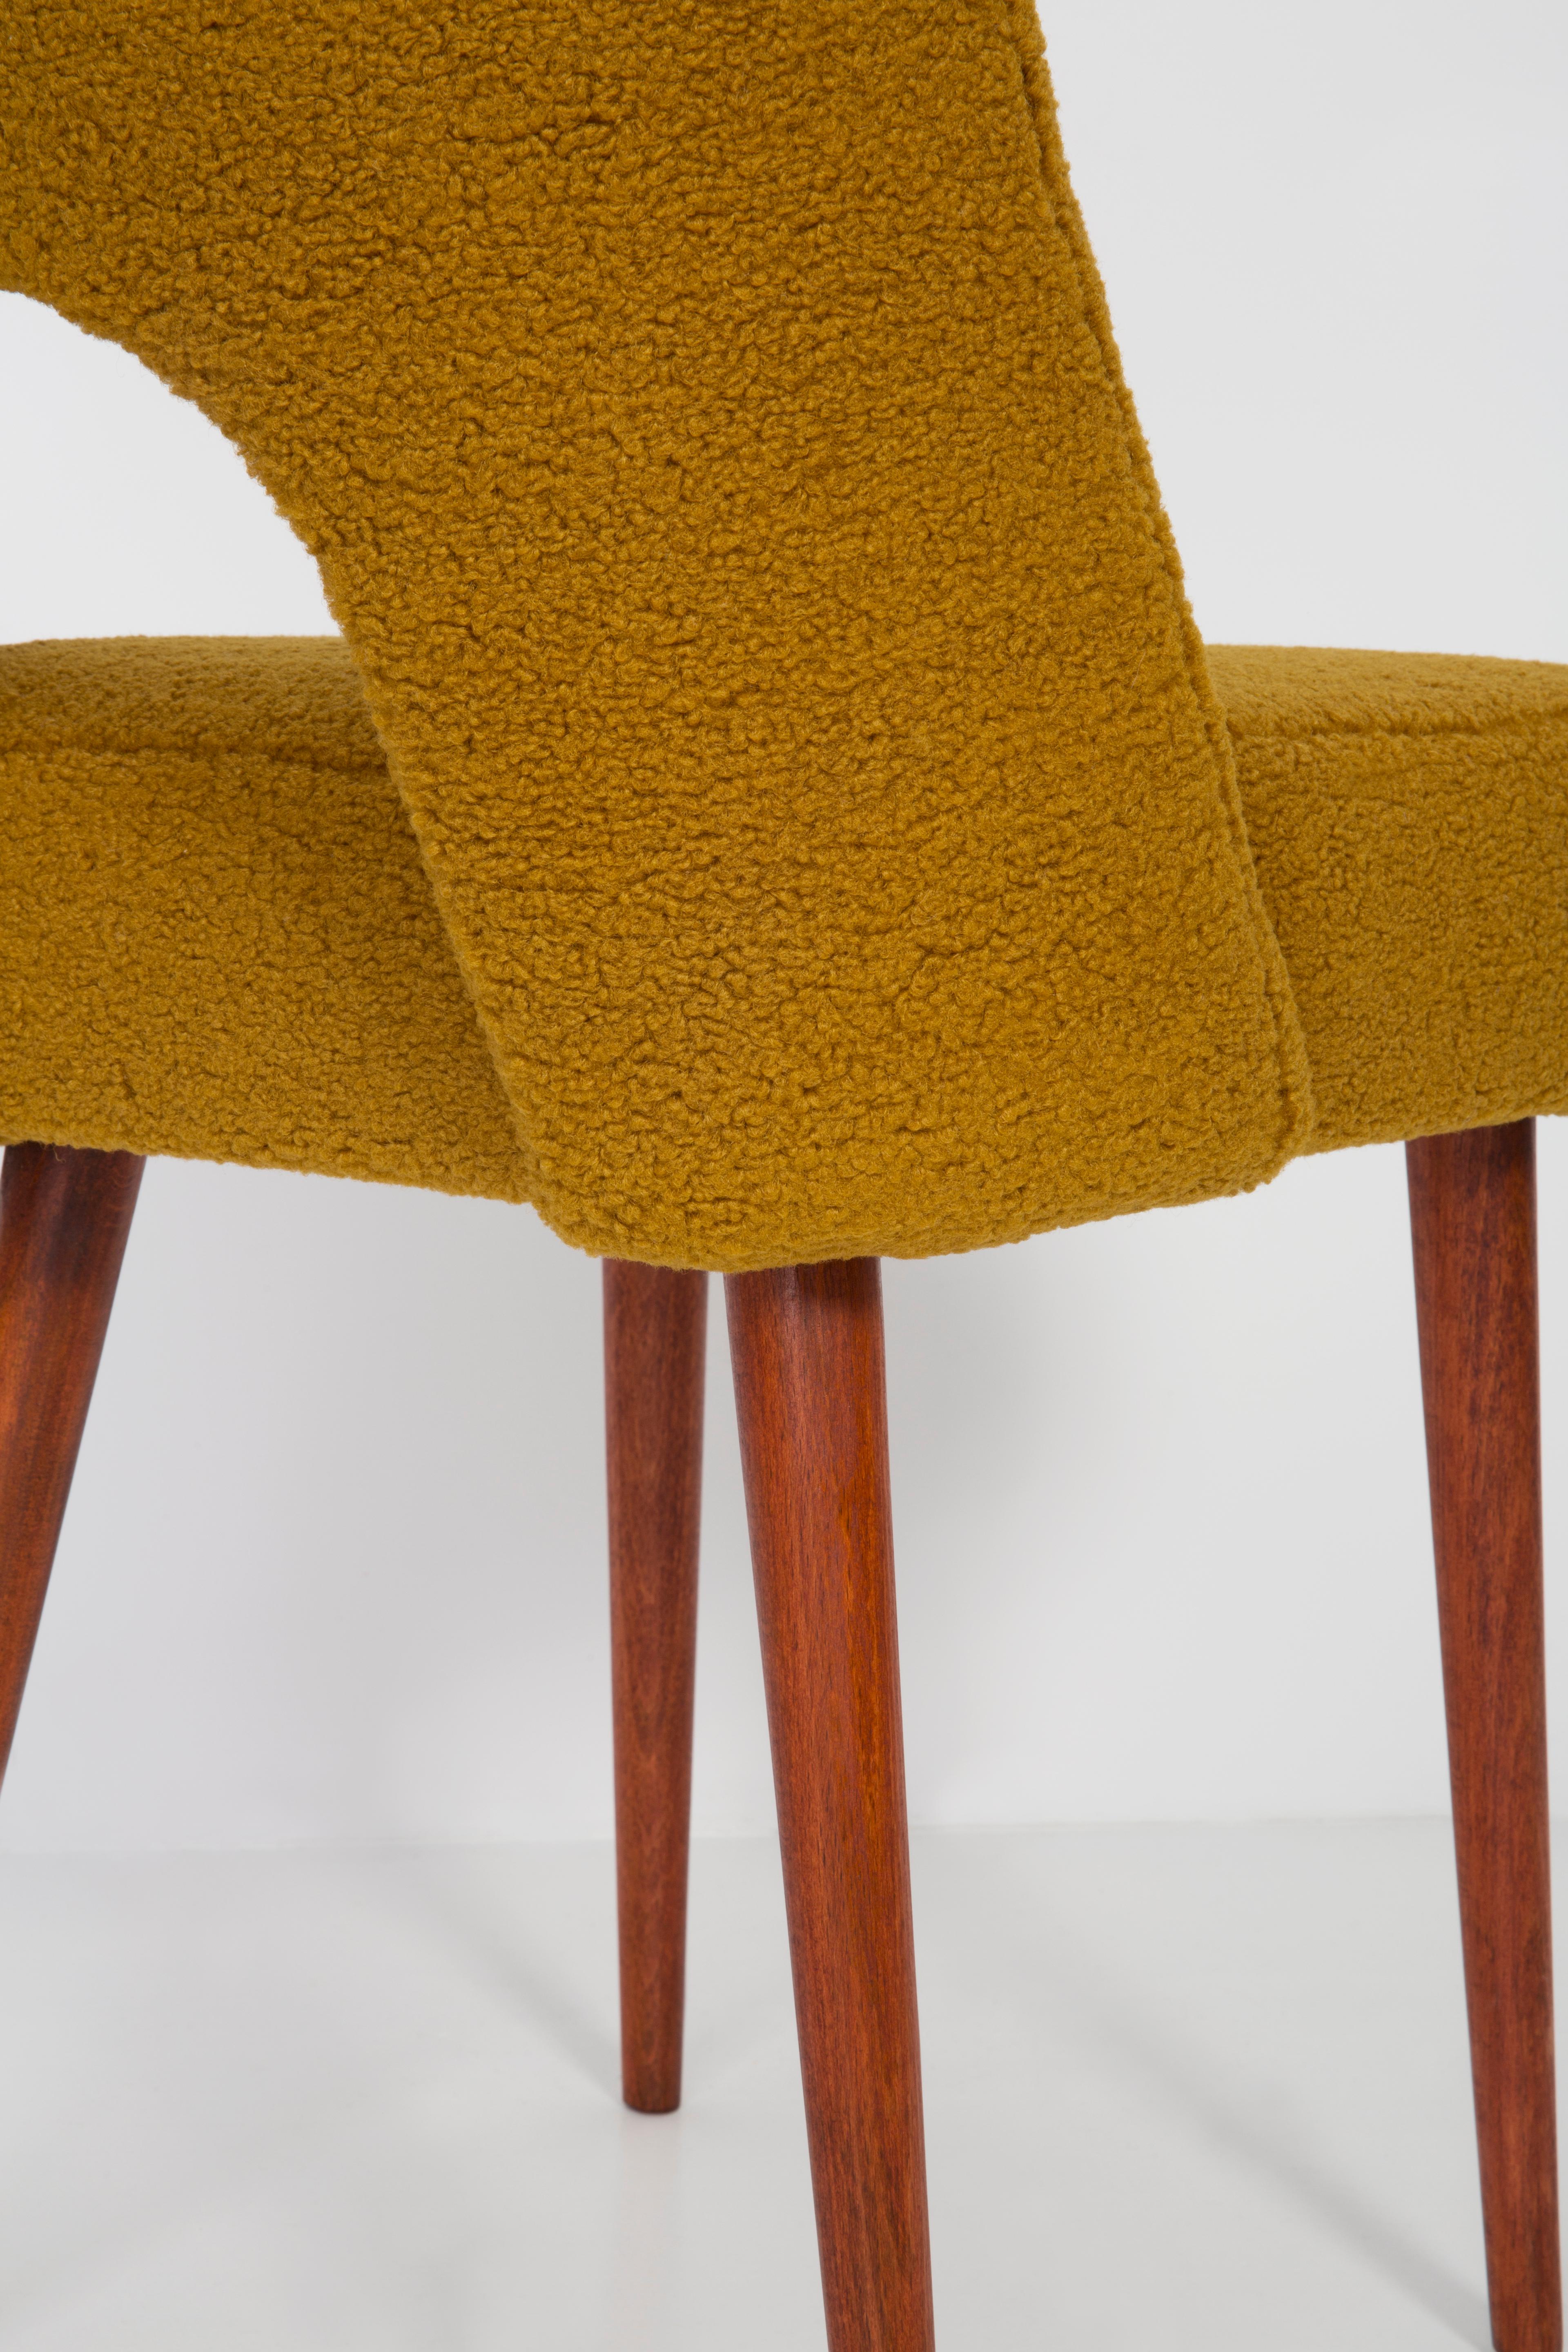 Set of Two Yellow Ochre Boucle 'Shell' Chairs, 1960s For Sale 5